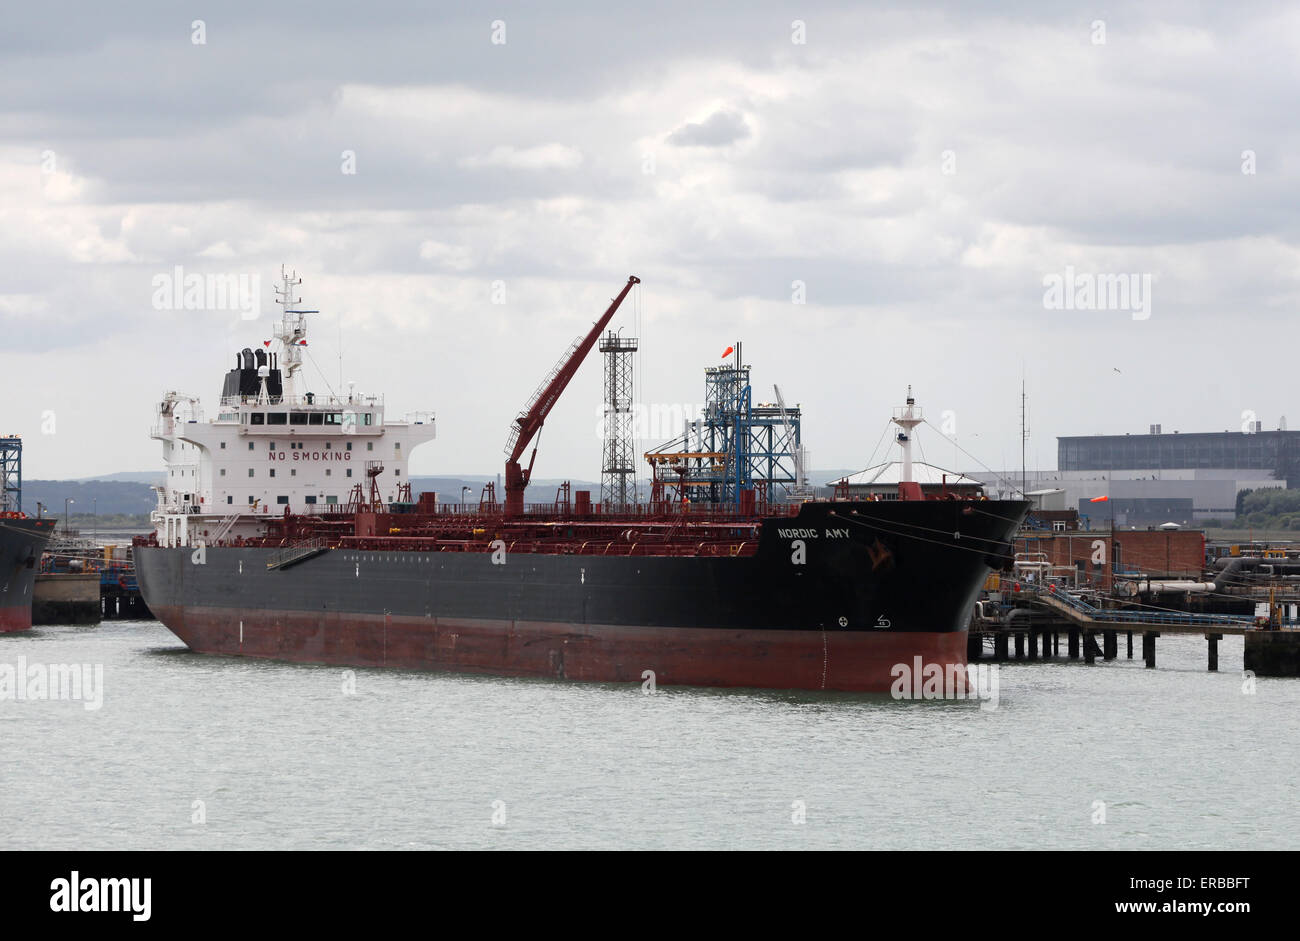 Nordic Amy Oil tanker ship pictured at Fawley Refinery near Southampton UK Stock Photo